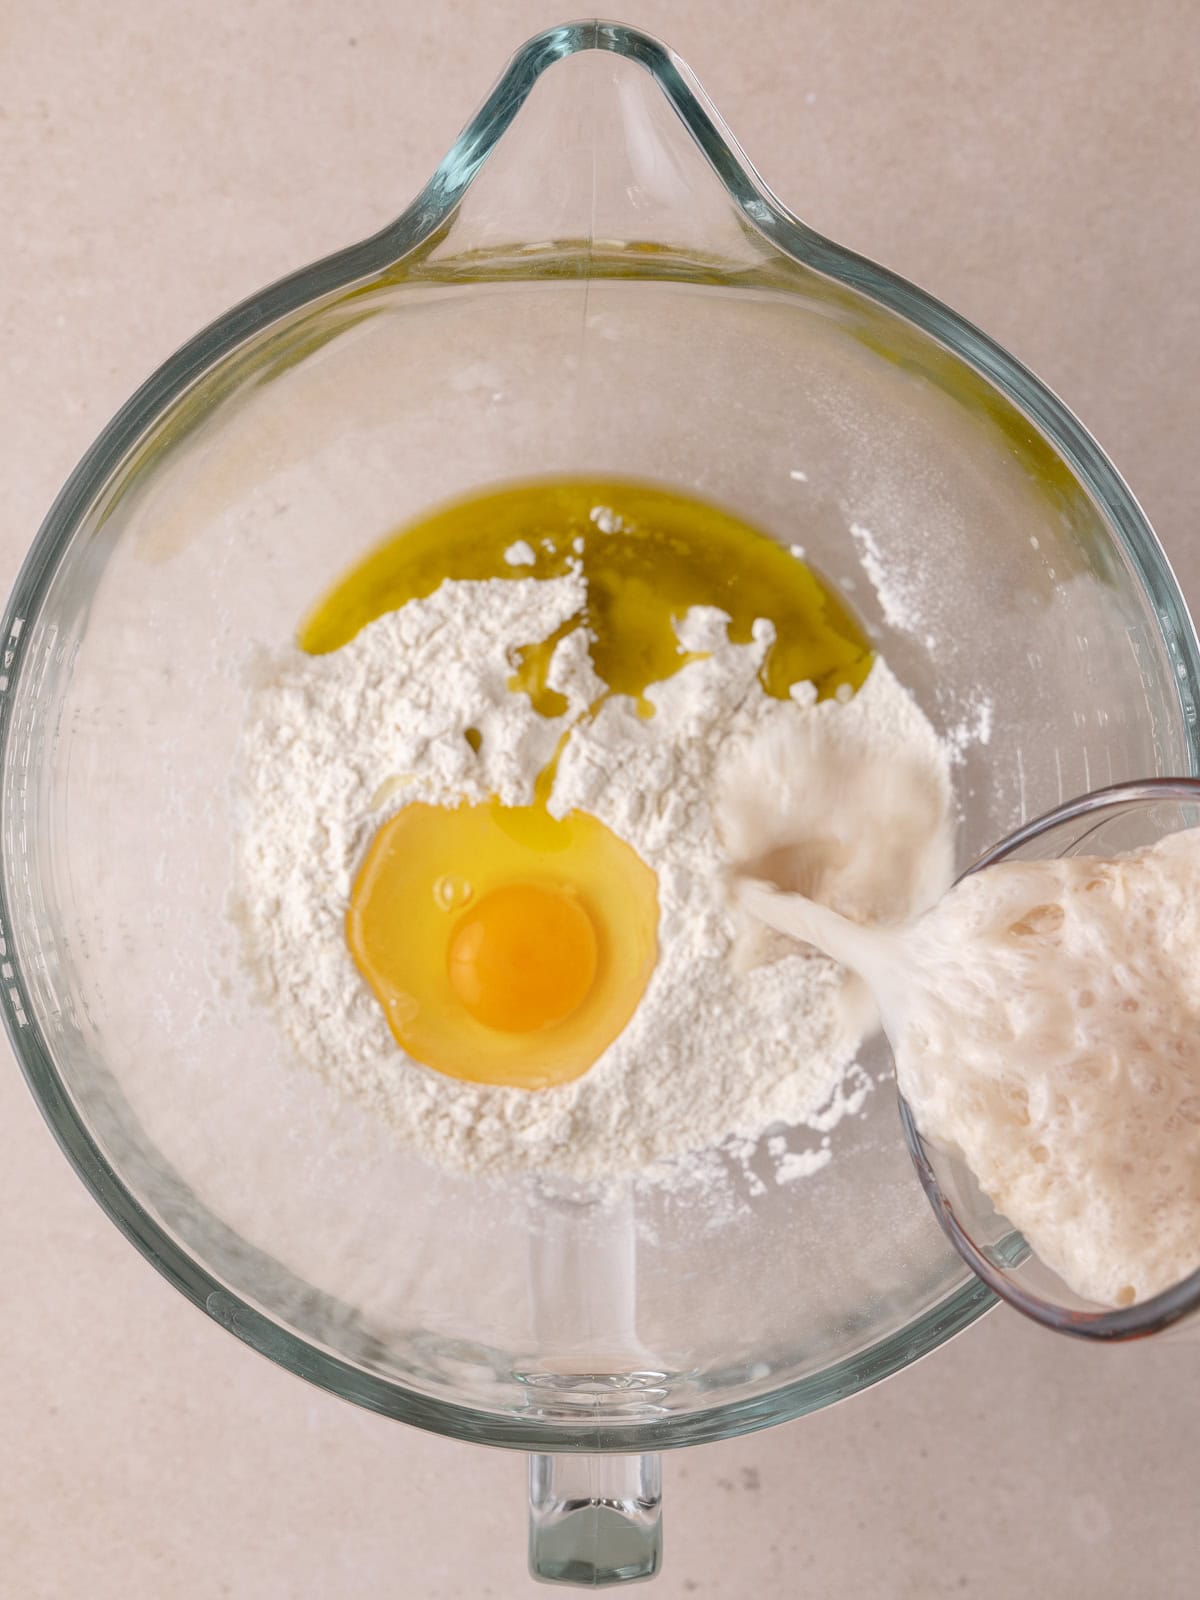 Bread flour, salt, egg, olive oil and yeast mixture in a large bowl.